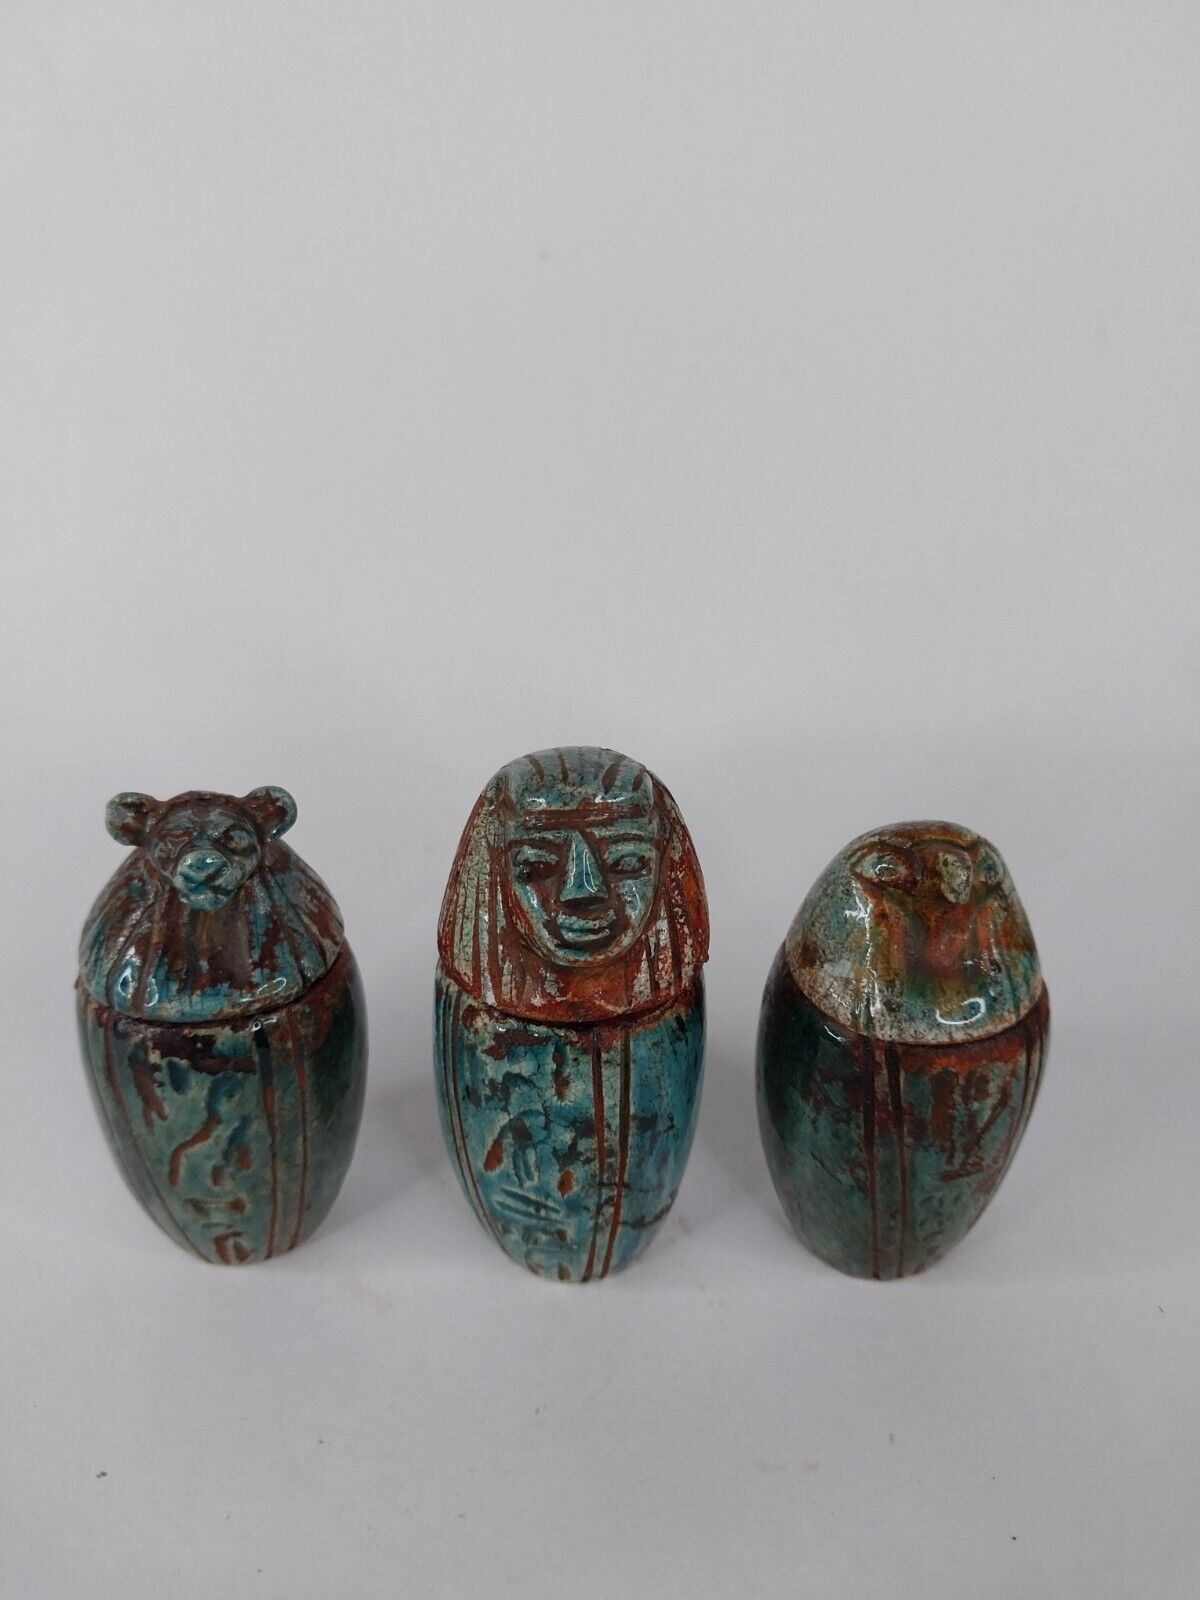 RARE ANCIENT EGYPTIAN ANTIQUE 3 Canopic Jar Ancient Egyptian Stone Statue